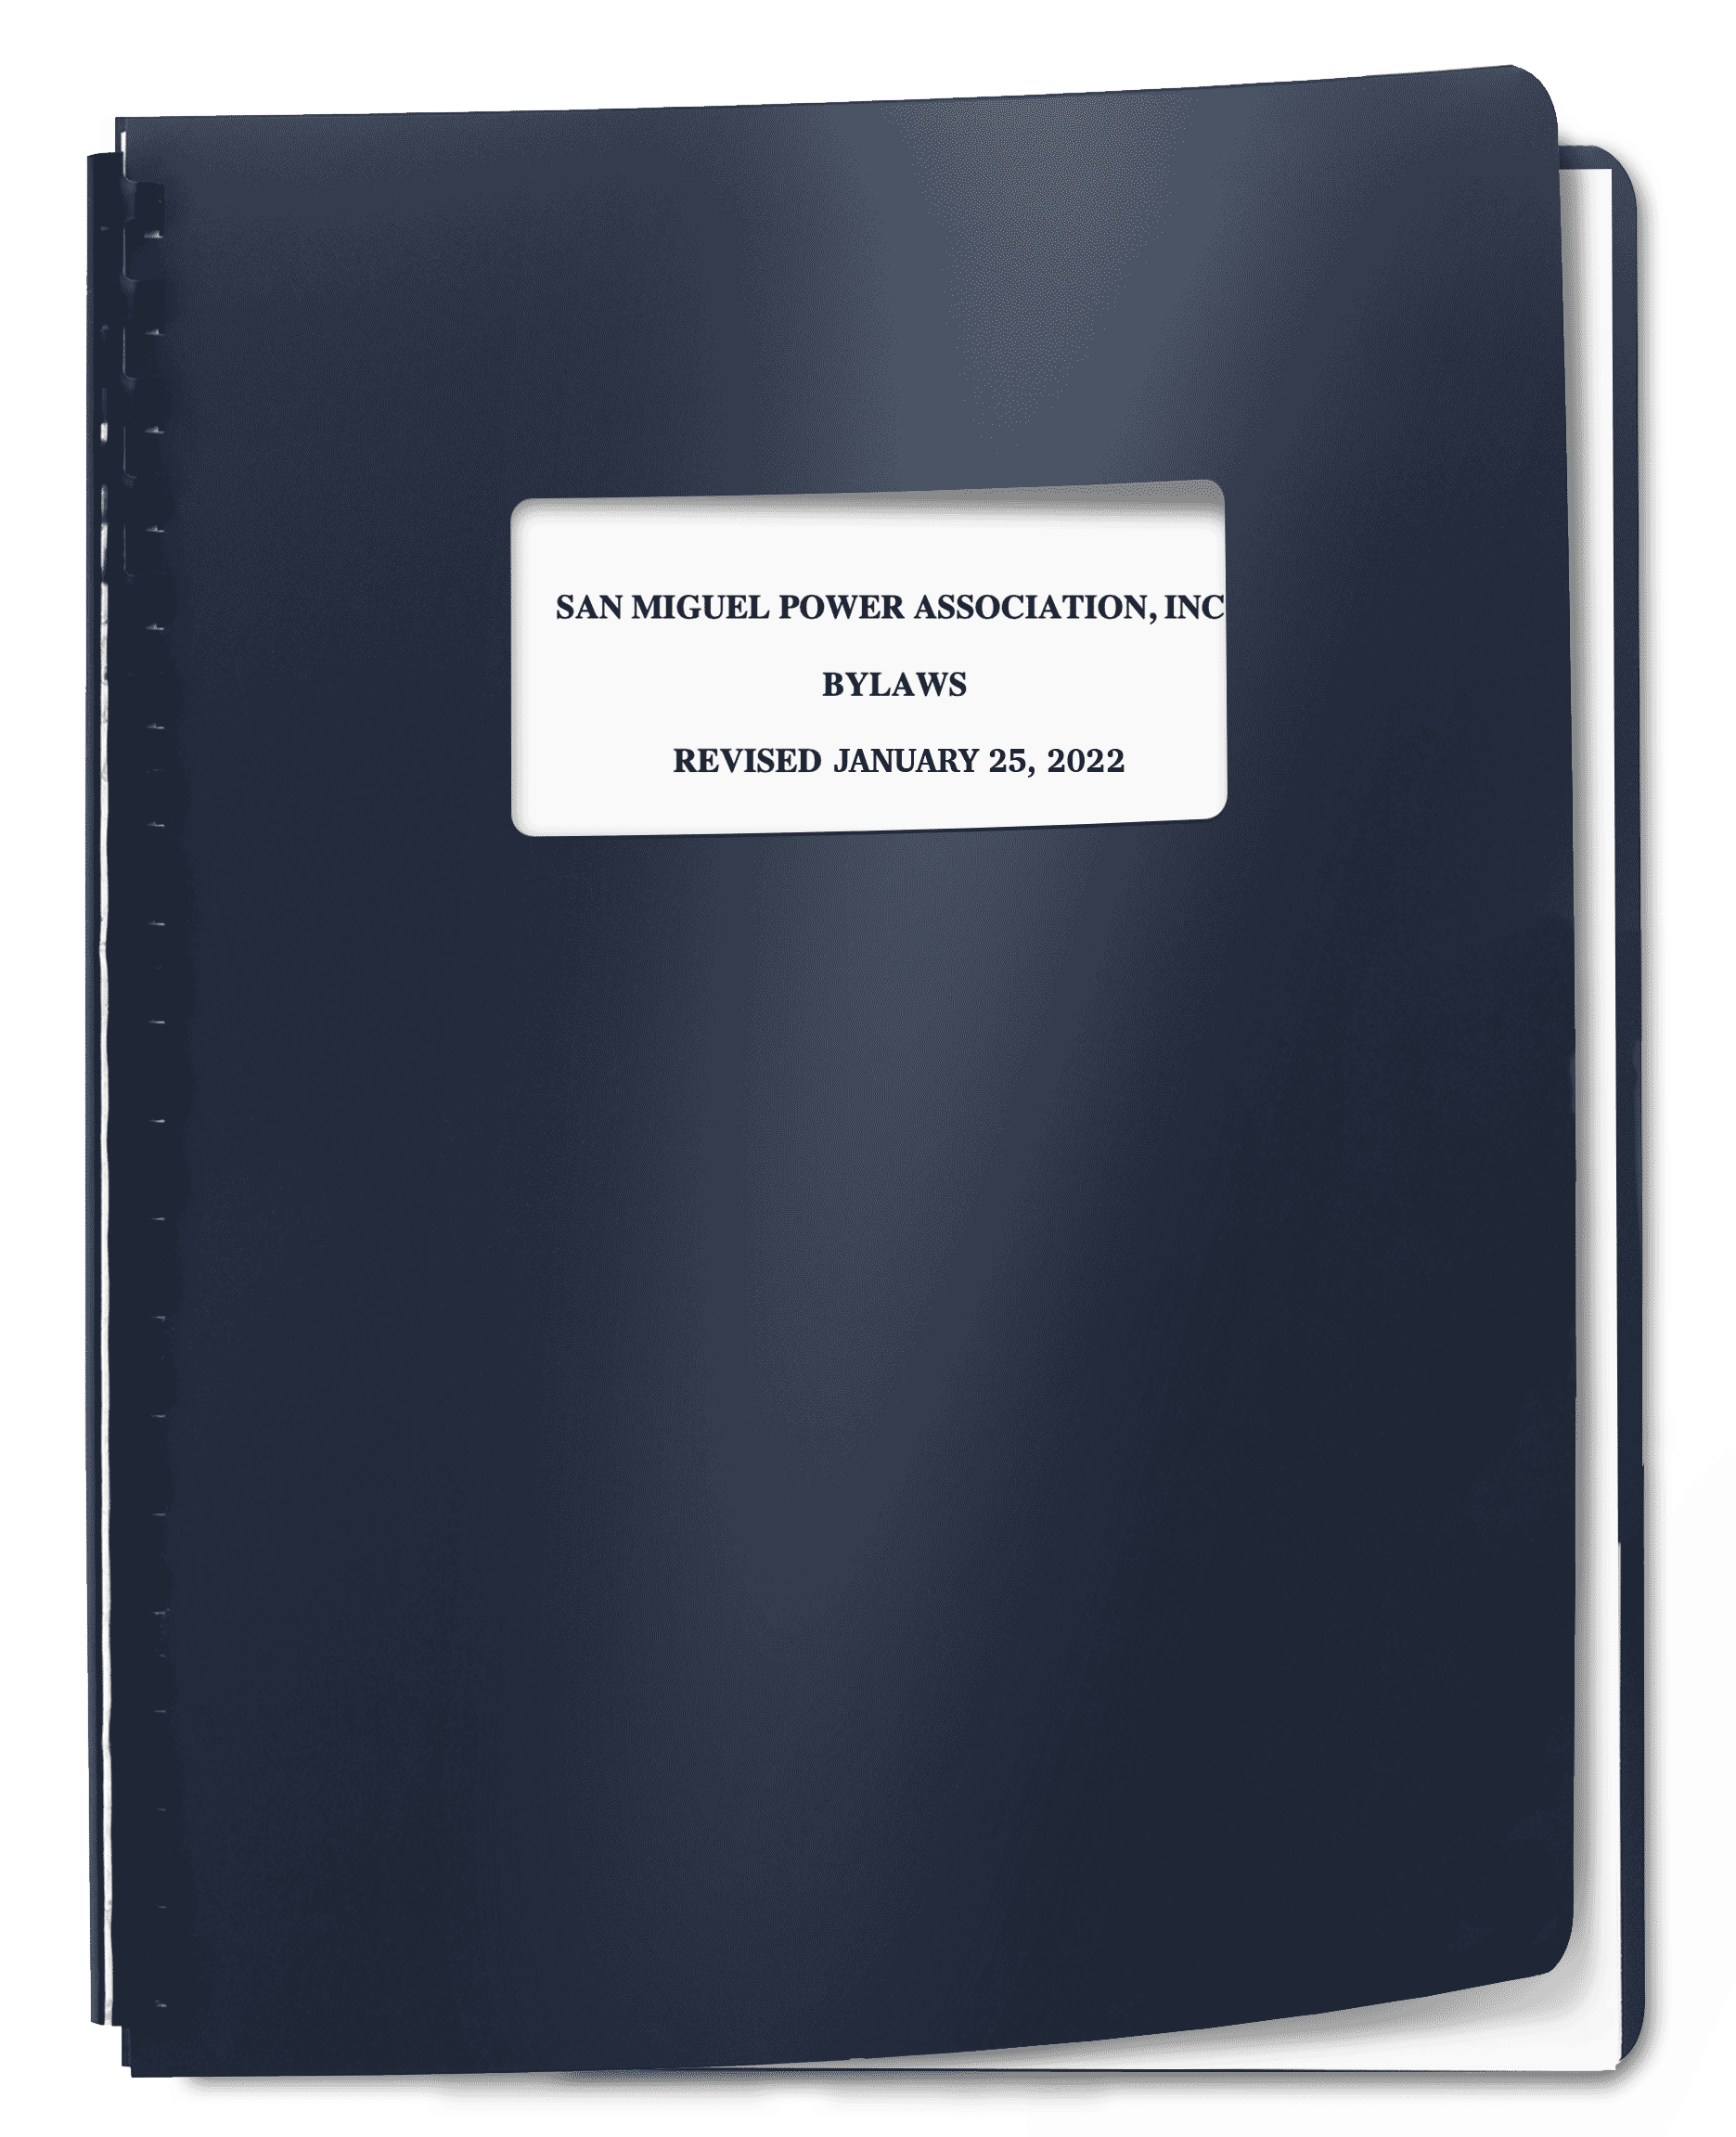 SMPA Bylaws Notebook